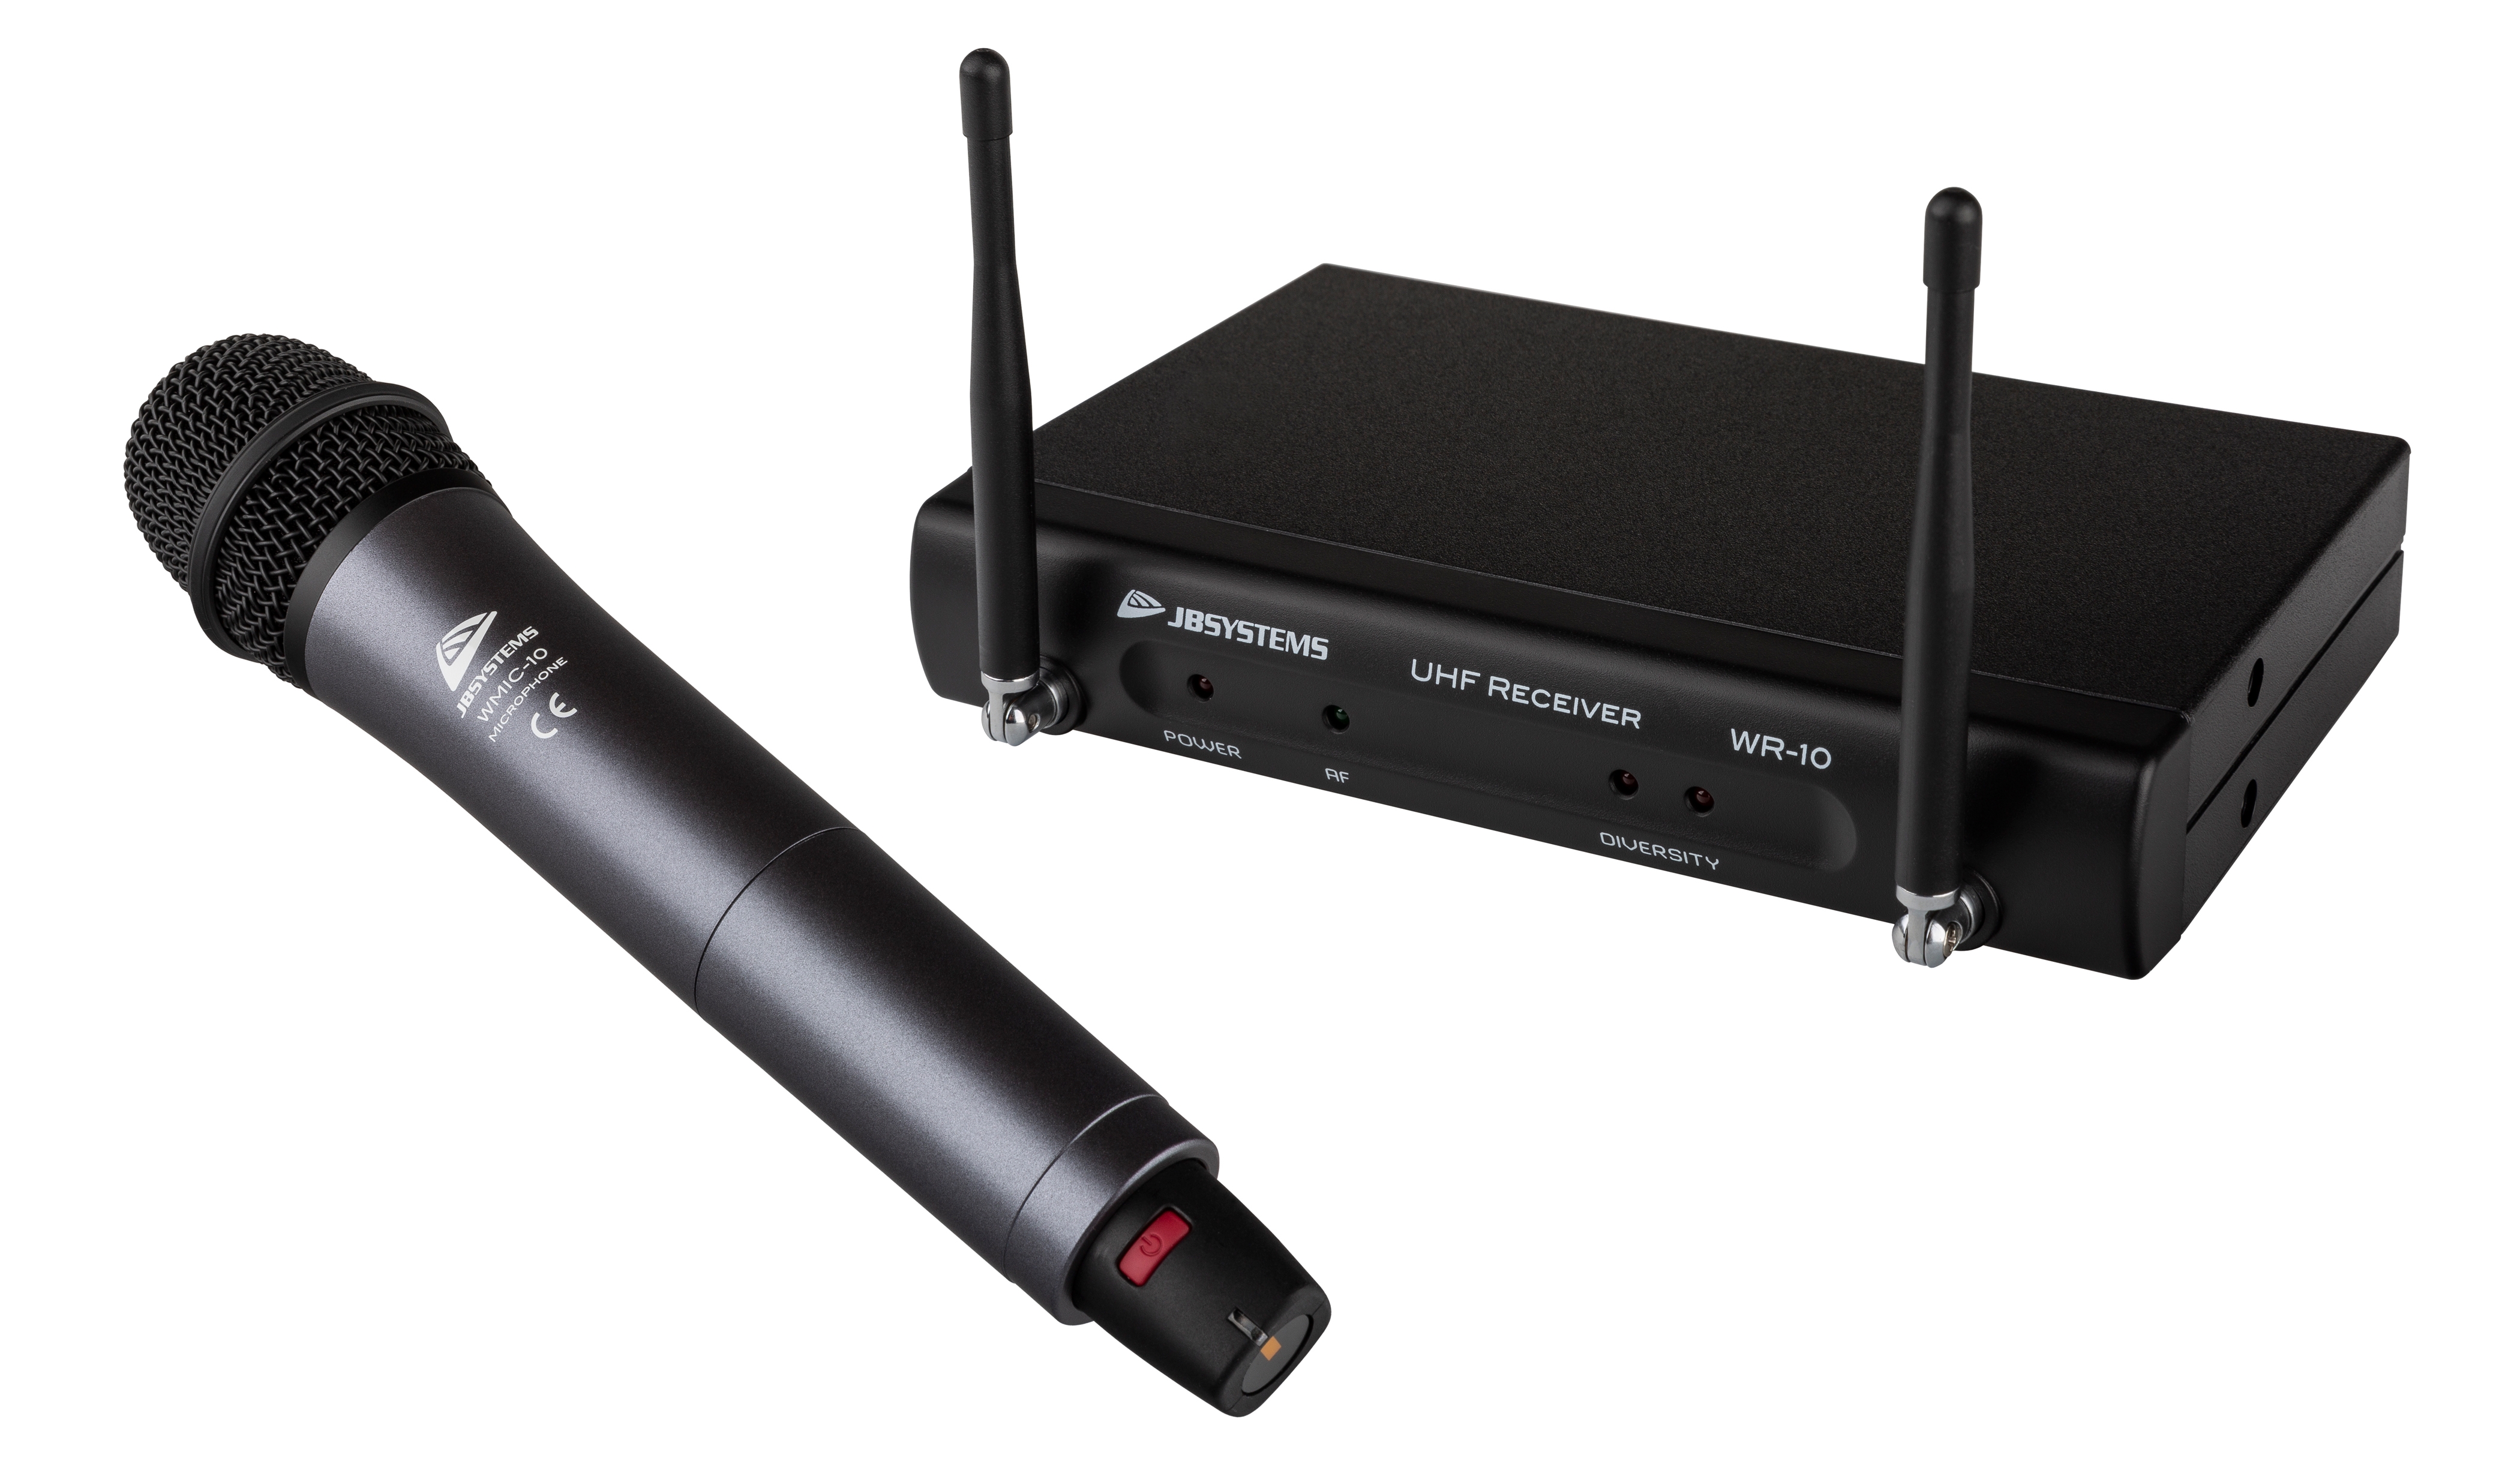 UHF wireless microphone system including WMIC-10 hand microphone